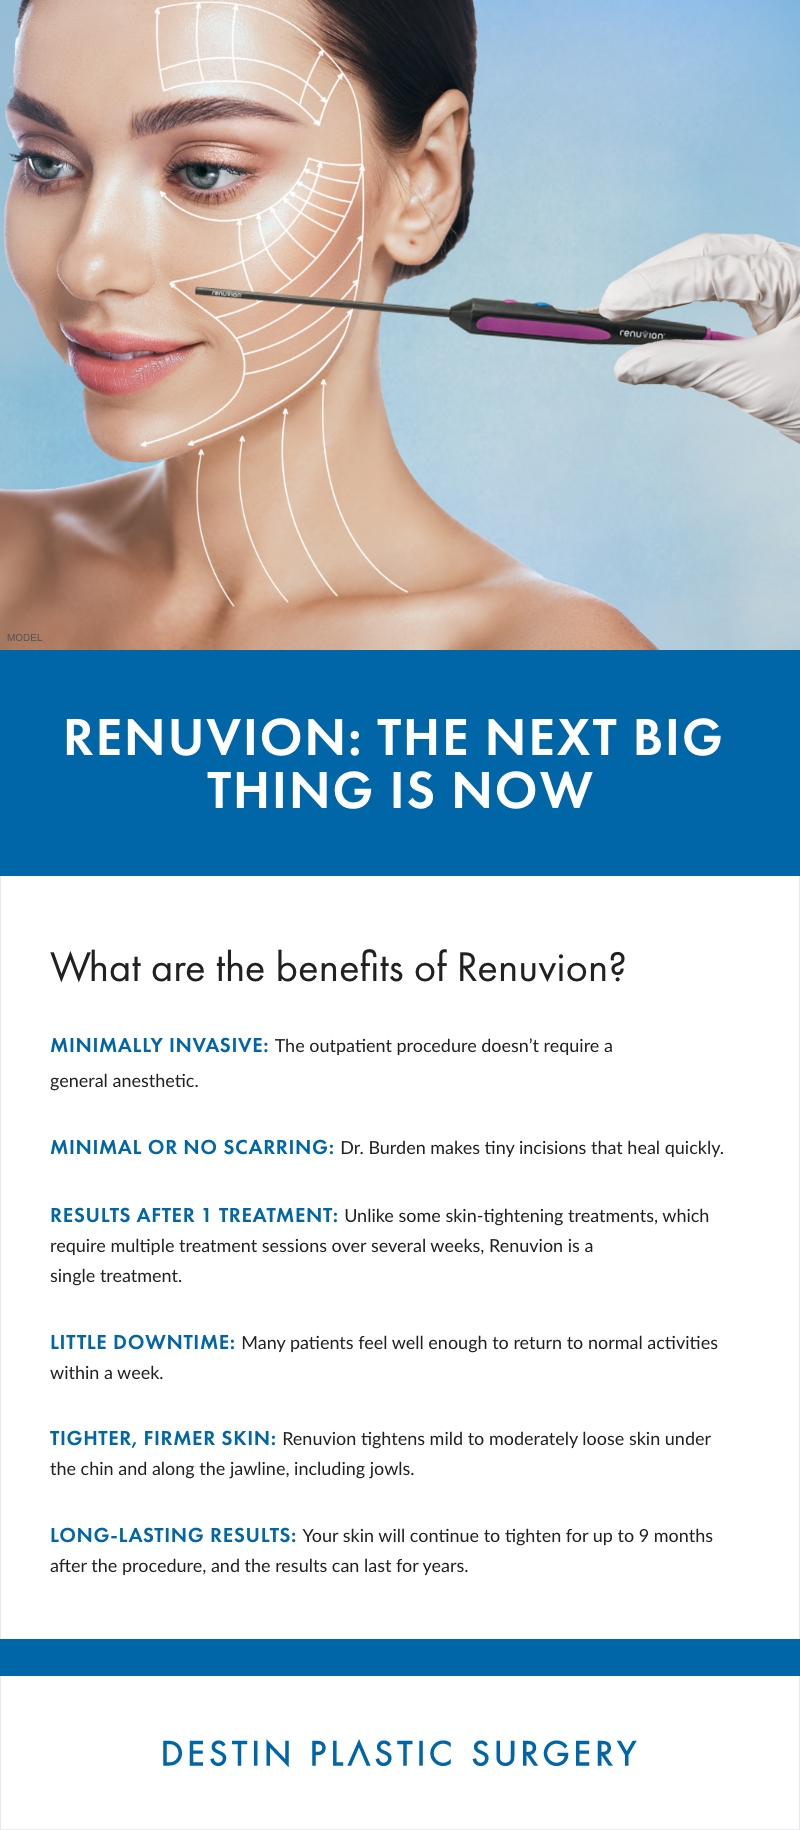 Infographic Text: 

RENUVION: THE NEXT BIG THING IS NOW

What are the benefits of Renuvion?

MINIMALLY INVASIVE: The outpatient procedure doesn't require a general anesthetic.

MINIMAL OR NO SCARRING: Dr. Burden makes tiny incisions that heal quickly.

RESULTS AFTER 1 TREATMENT: Unlike some skin-tightening treatments, which require multiple treatment sessions over several weeks, Renuvion is a single treatment.

LITTLE DOWNTIME: Many patients feel well enough to return to normal activities within a week.

TIGHTER, FIRMER SKIN: Renuvion tightens mild to moderately loose skin under the chin and along the jawline, including jowls.

LONG-LASTING RESULTS: Your skin will continue to tighten for up to 9 months after the procedure, and the results can last for years.

DESTIN PLASTIC SURGERY logo.